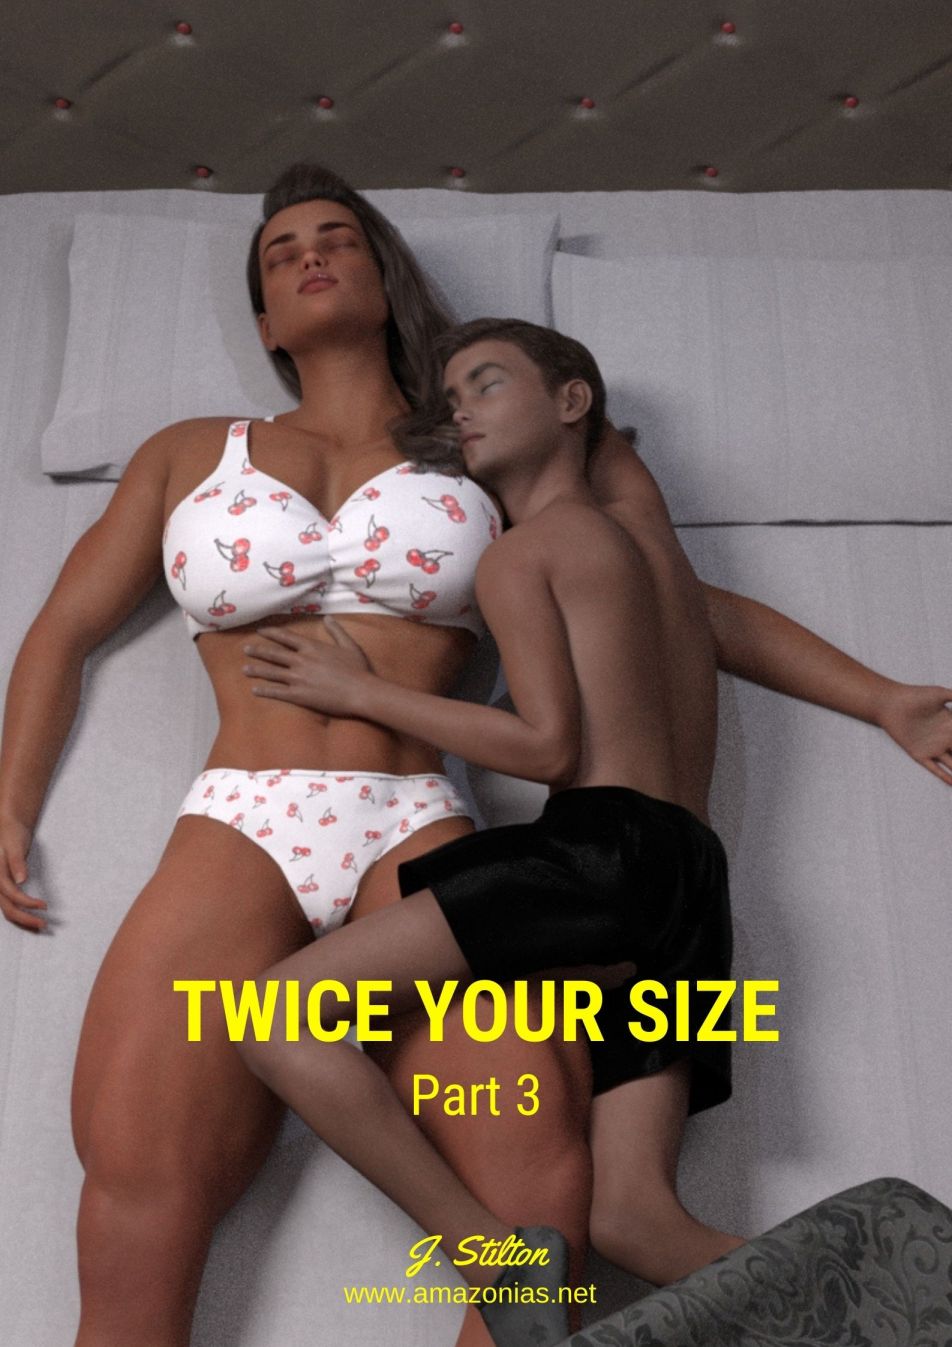 Twice your size - part 3